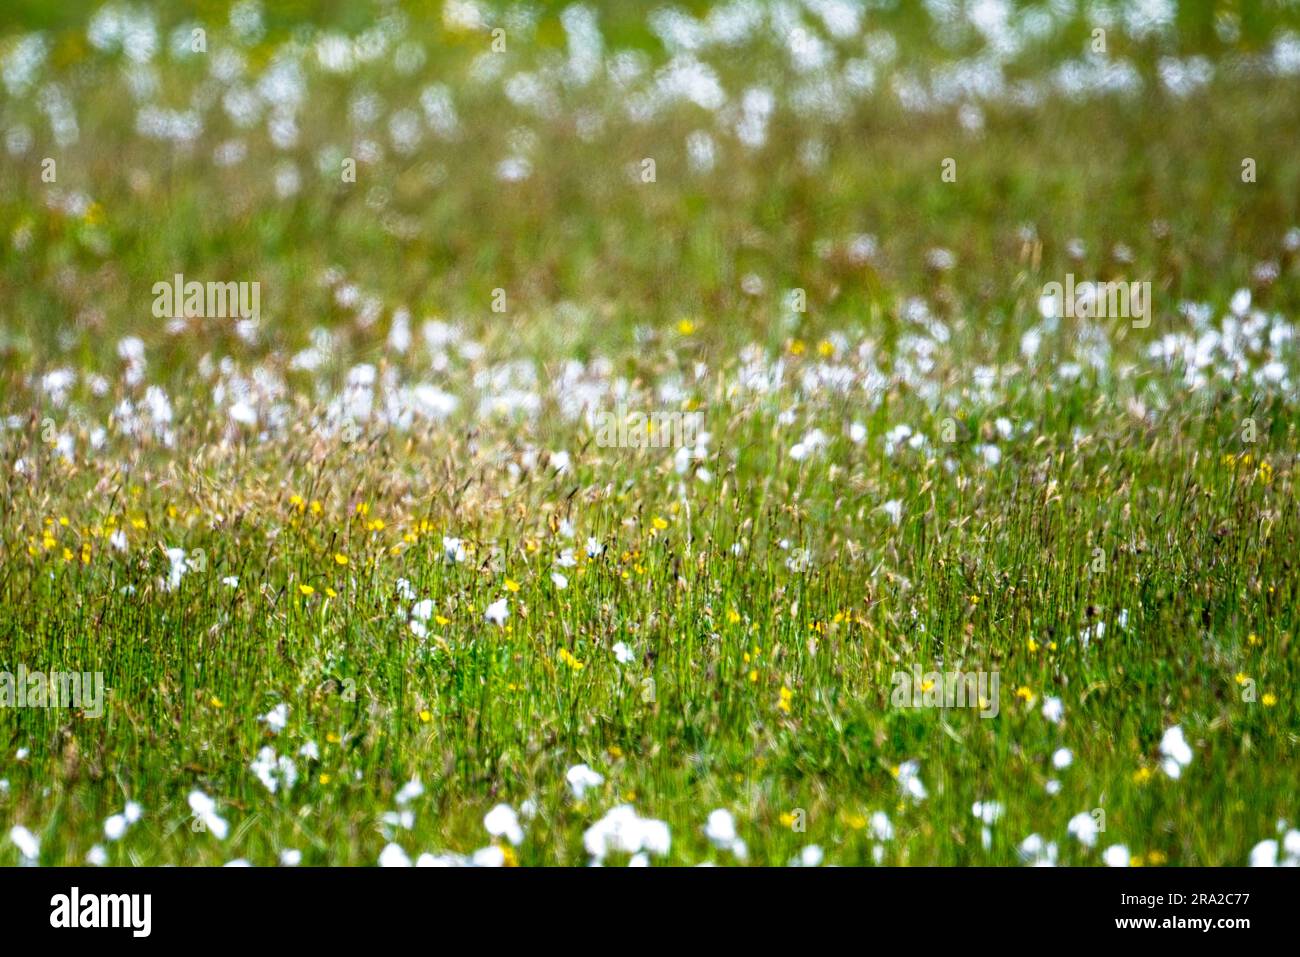 The machair, machair is a Gaelic word meaning fertile low lying grassy plain. This is the name given to one of the rarest habitats in Europe. Stock Photo